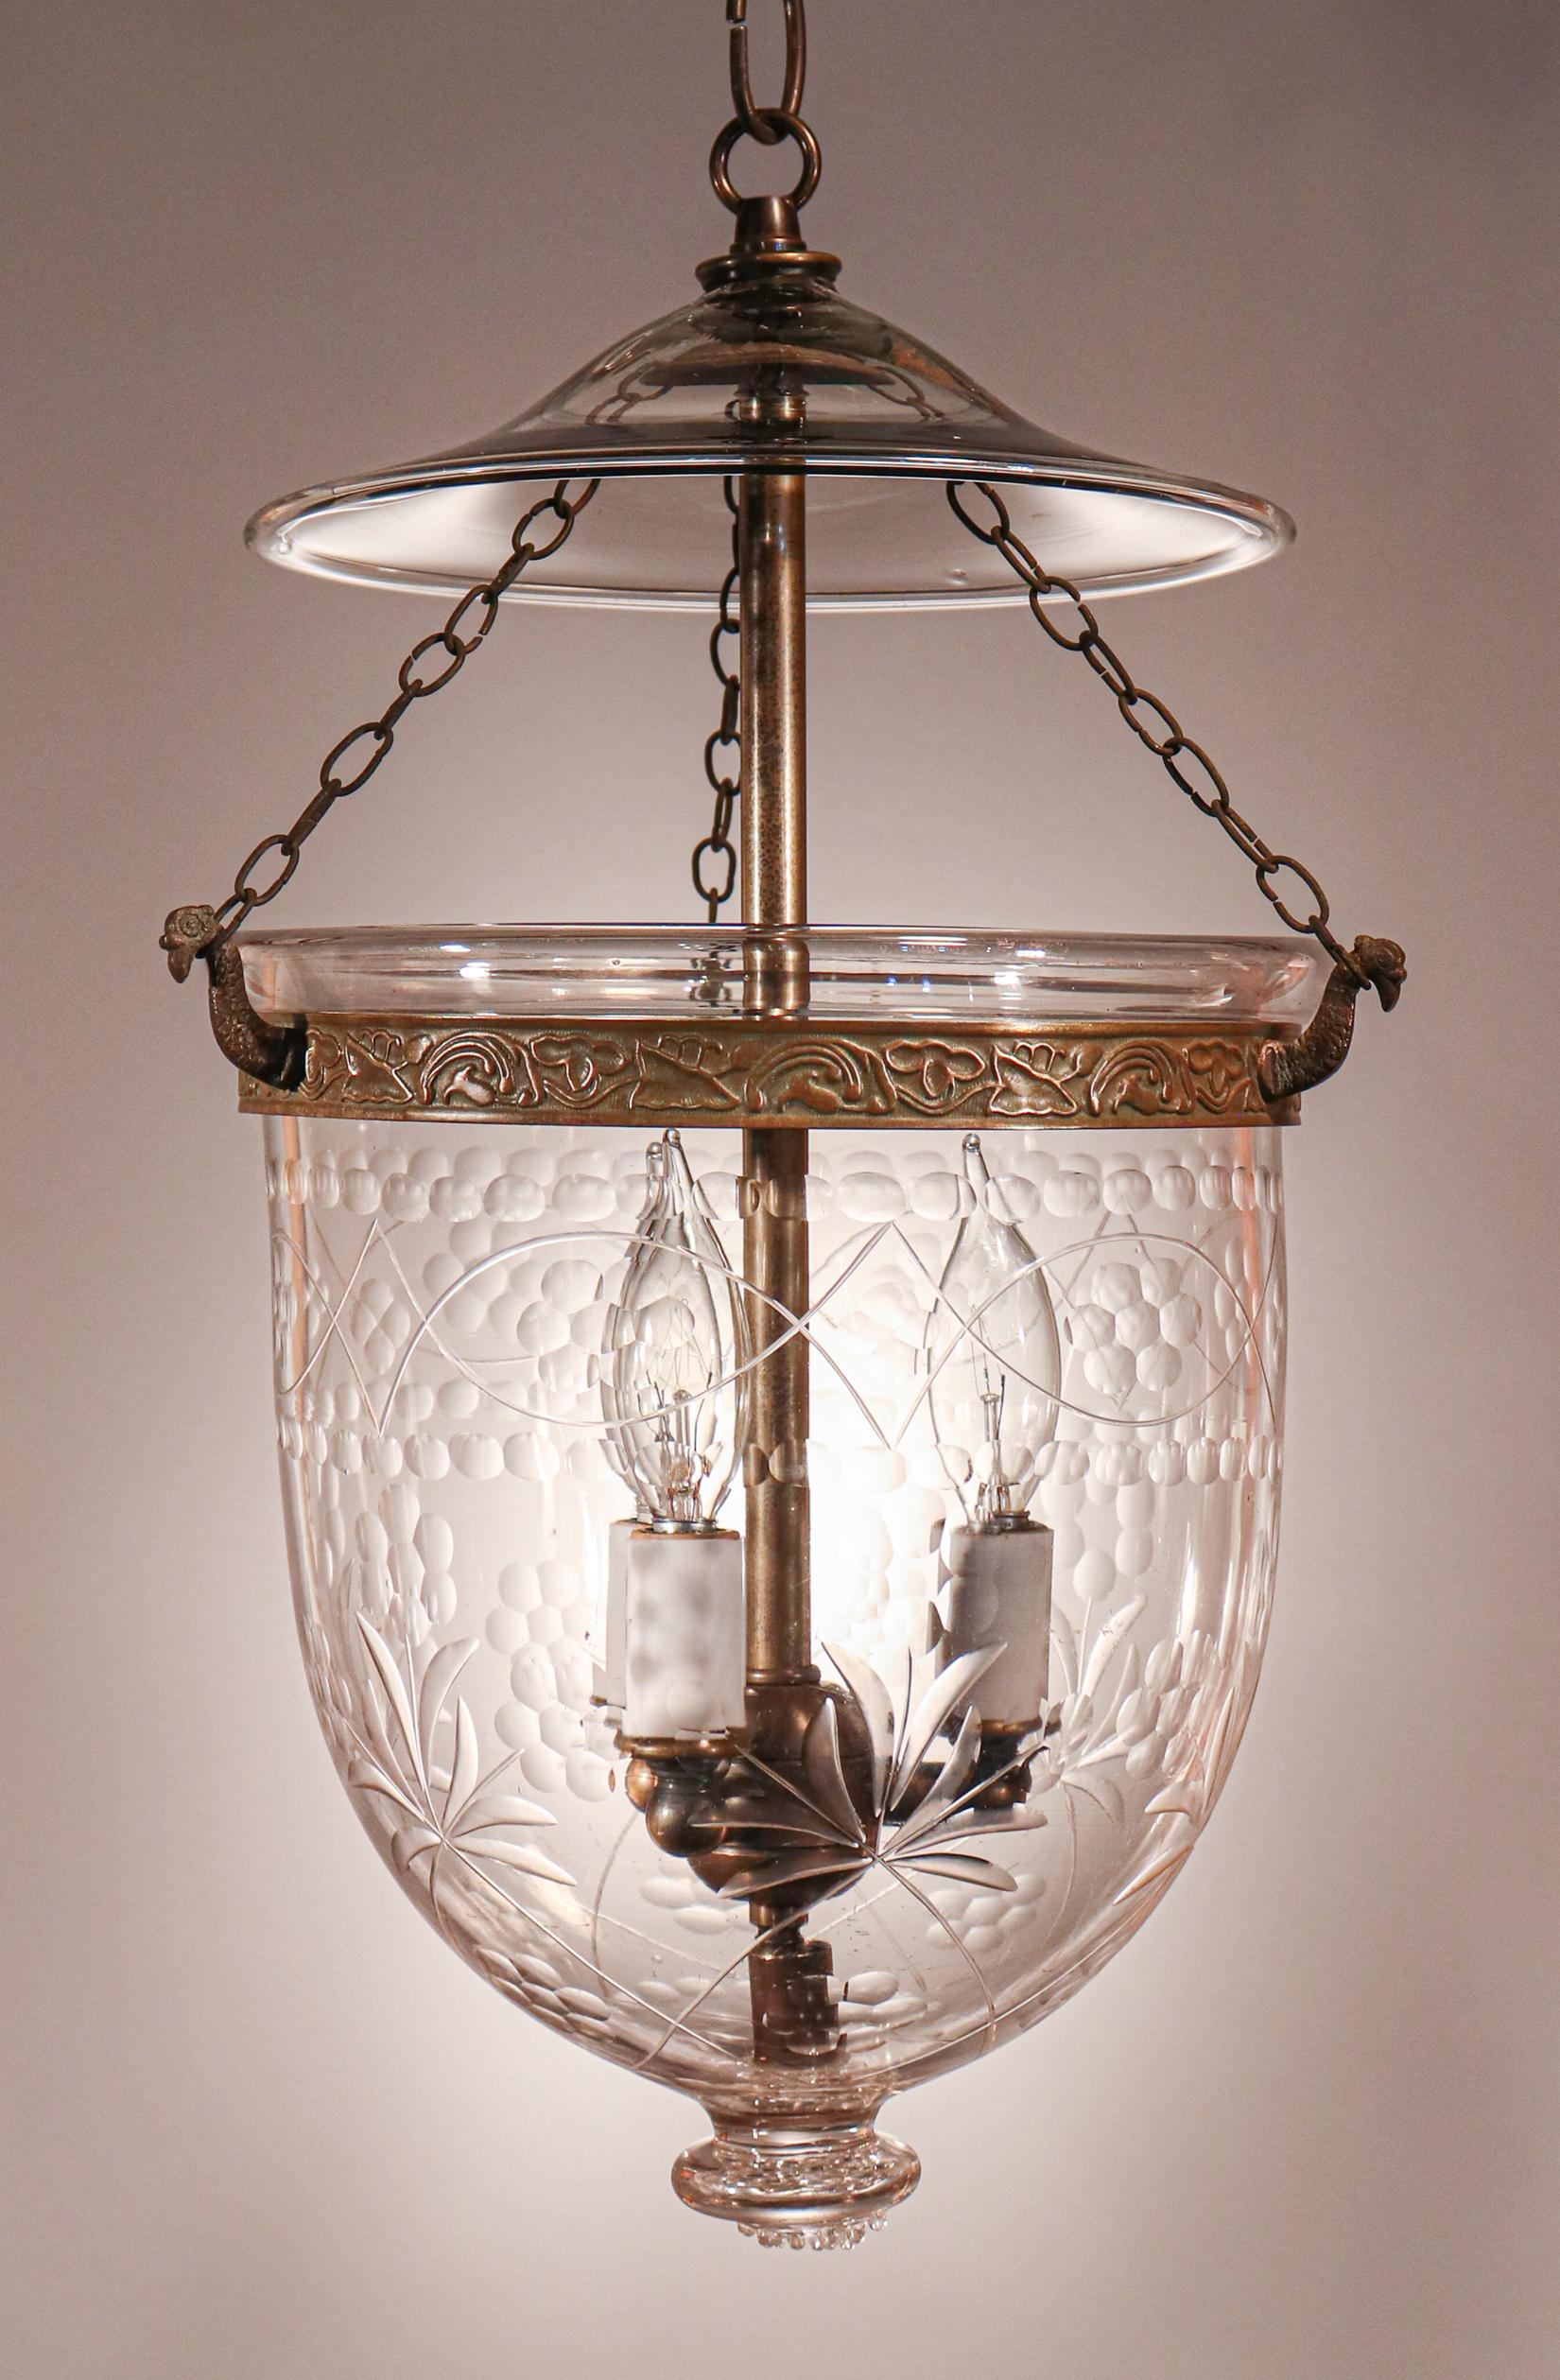 A charming English bell jar lantern with attractive form and an unusual decorative, polished etching. This circa 1890 petite pendant features excellent quality hand blown glass and its original smoke bell/lid and brass chains. The embossed brass